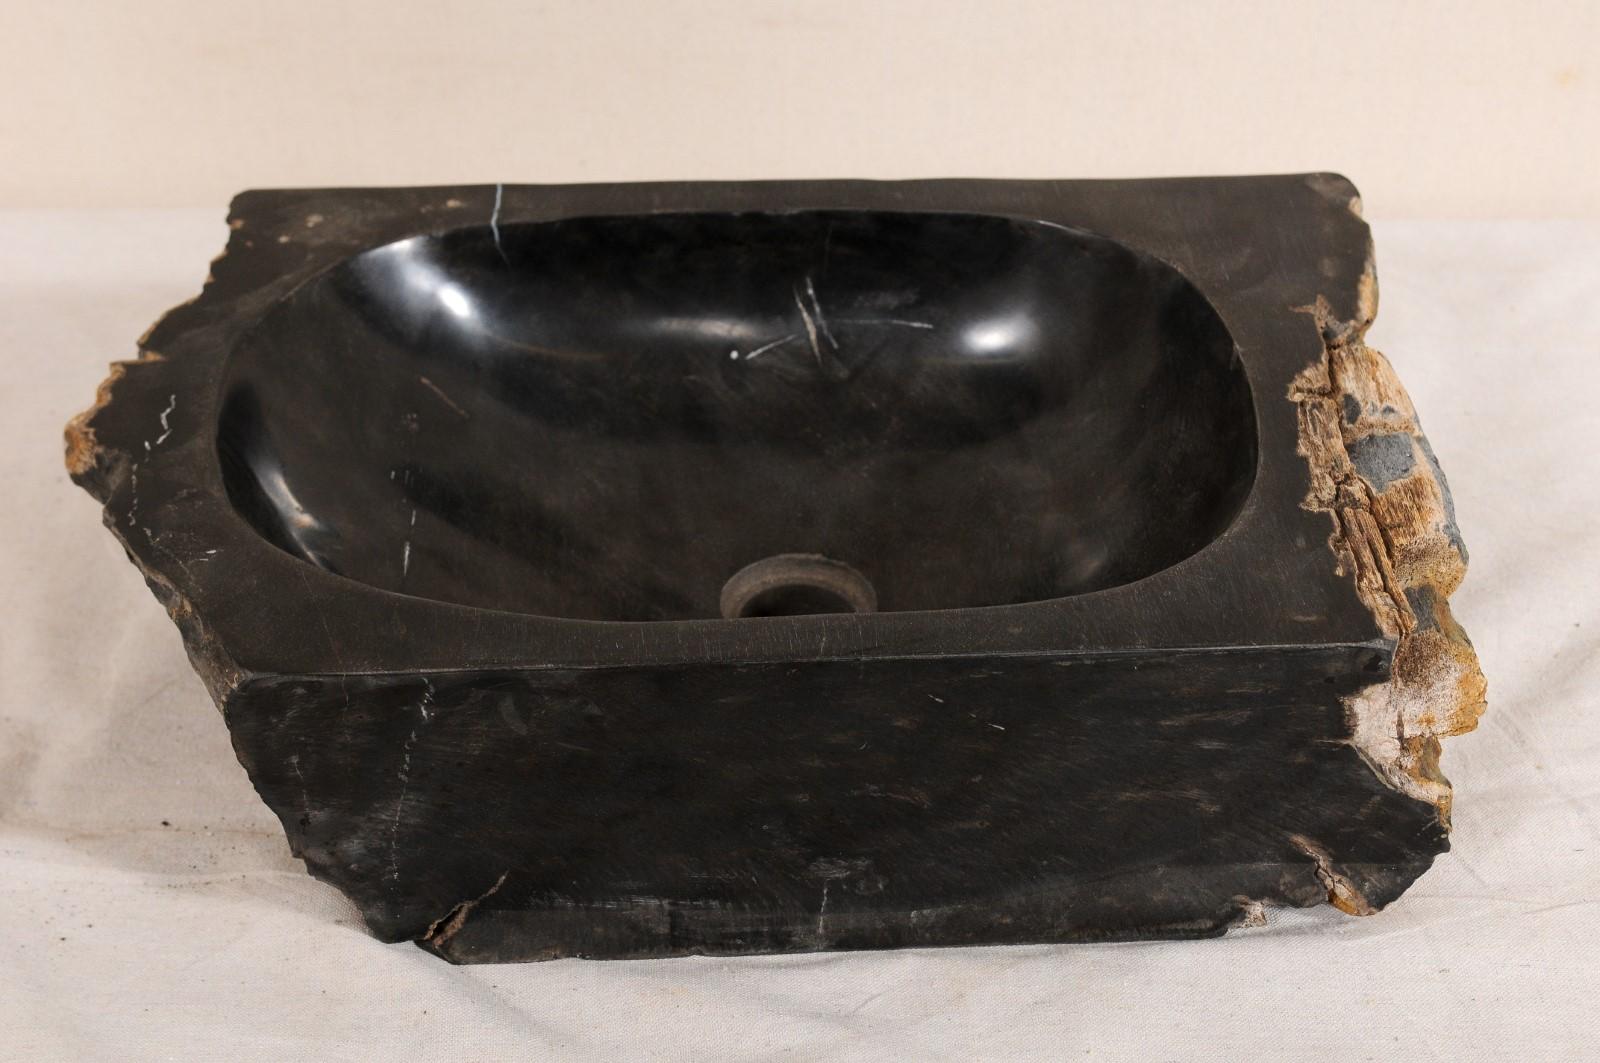 A single petrified wood wash basin. This petrified wood sink has a polished finish basin, making for easy clean-up, surrounded by an unpolished, natural textured exterior. Petrified wood is a fossil, and over time, the wood becomes so sturdy and